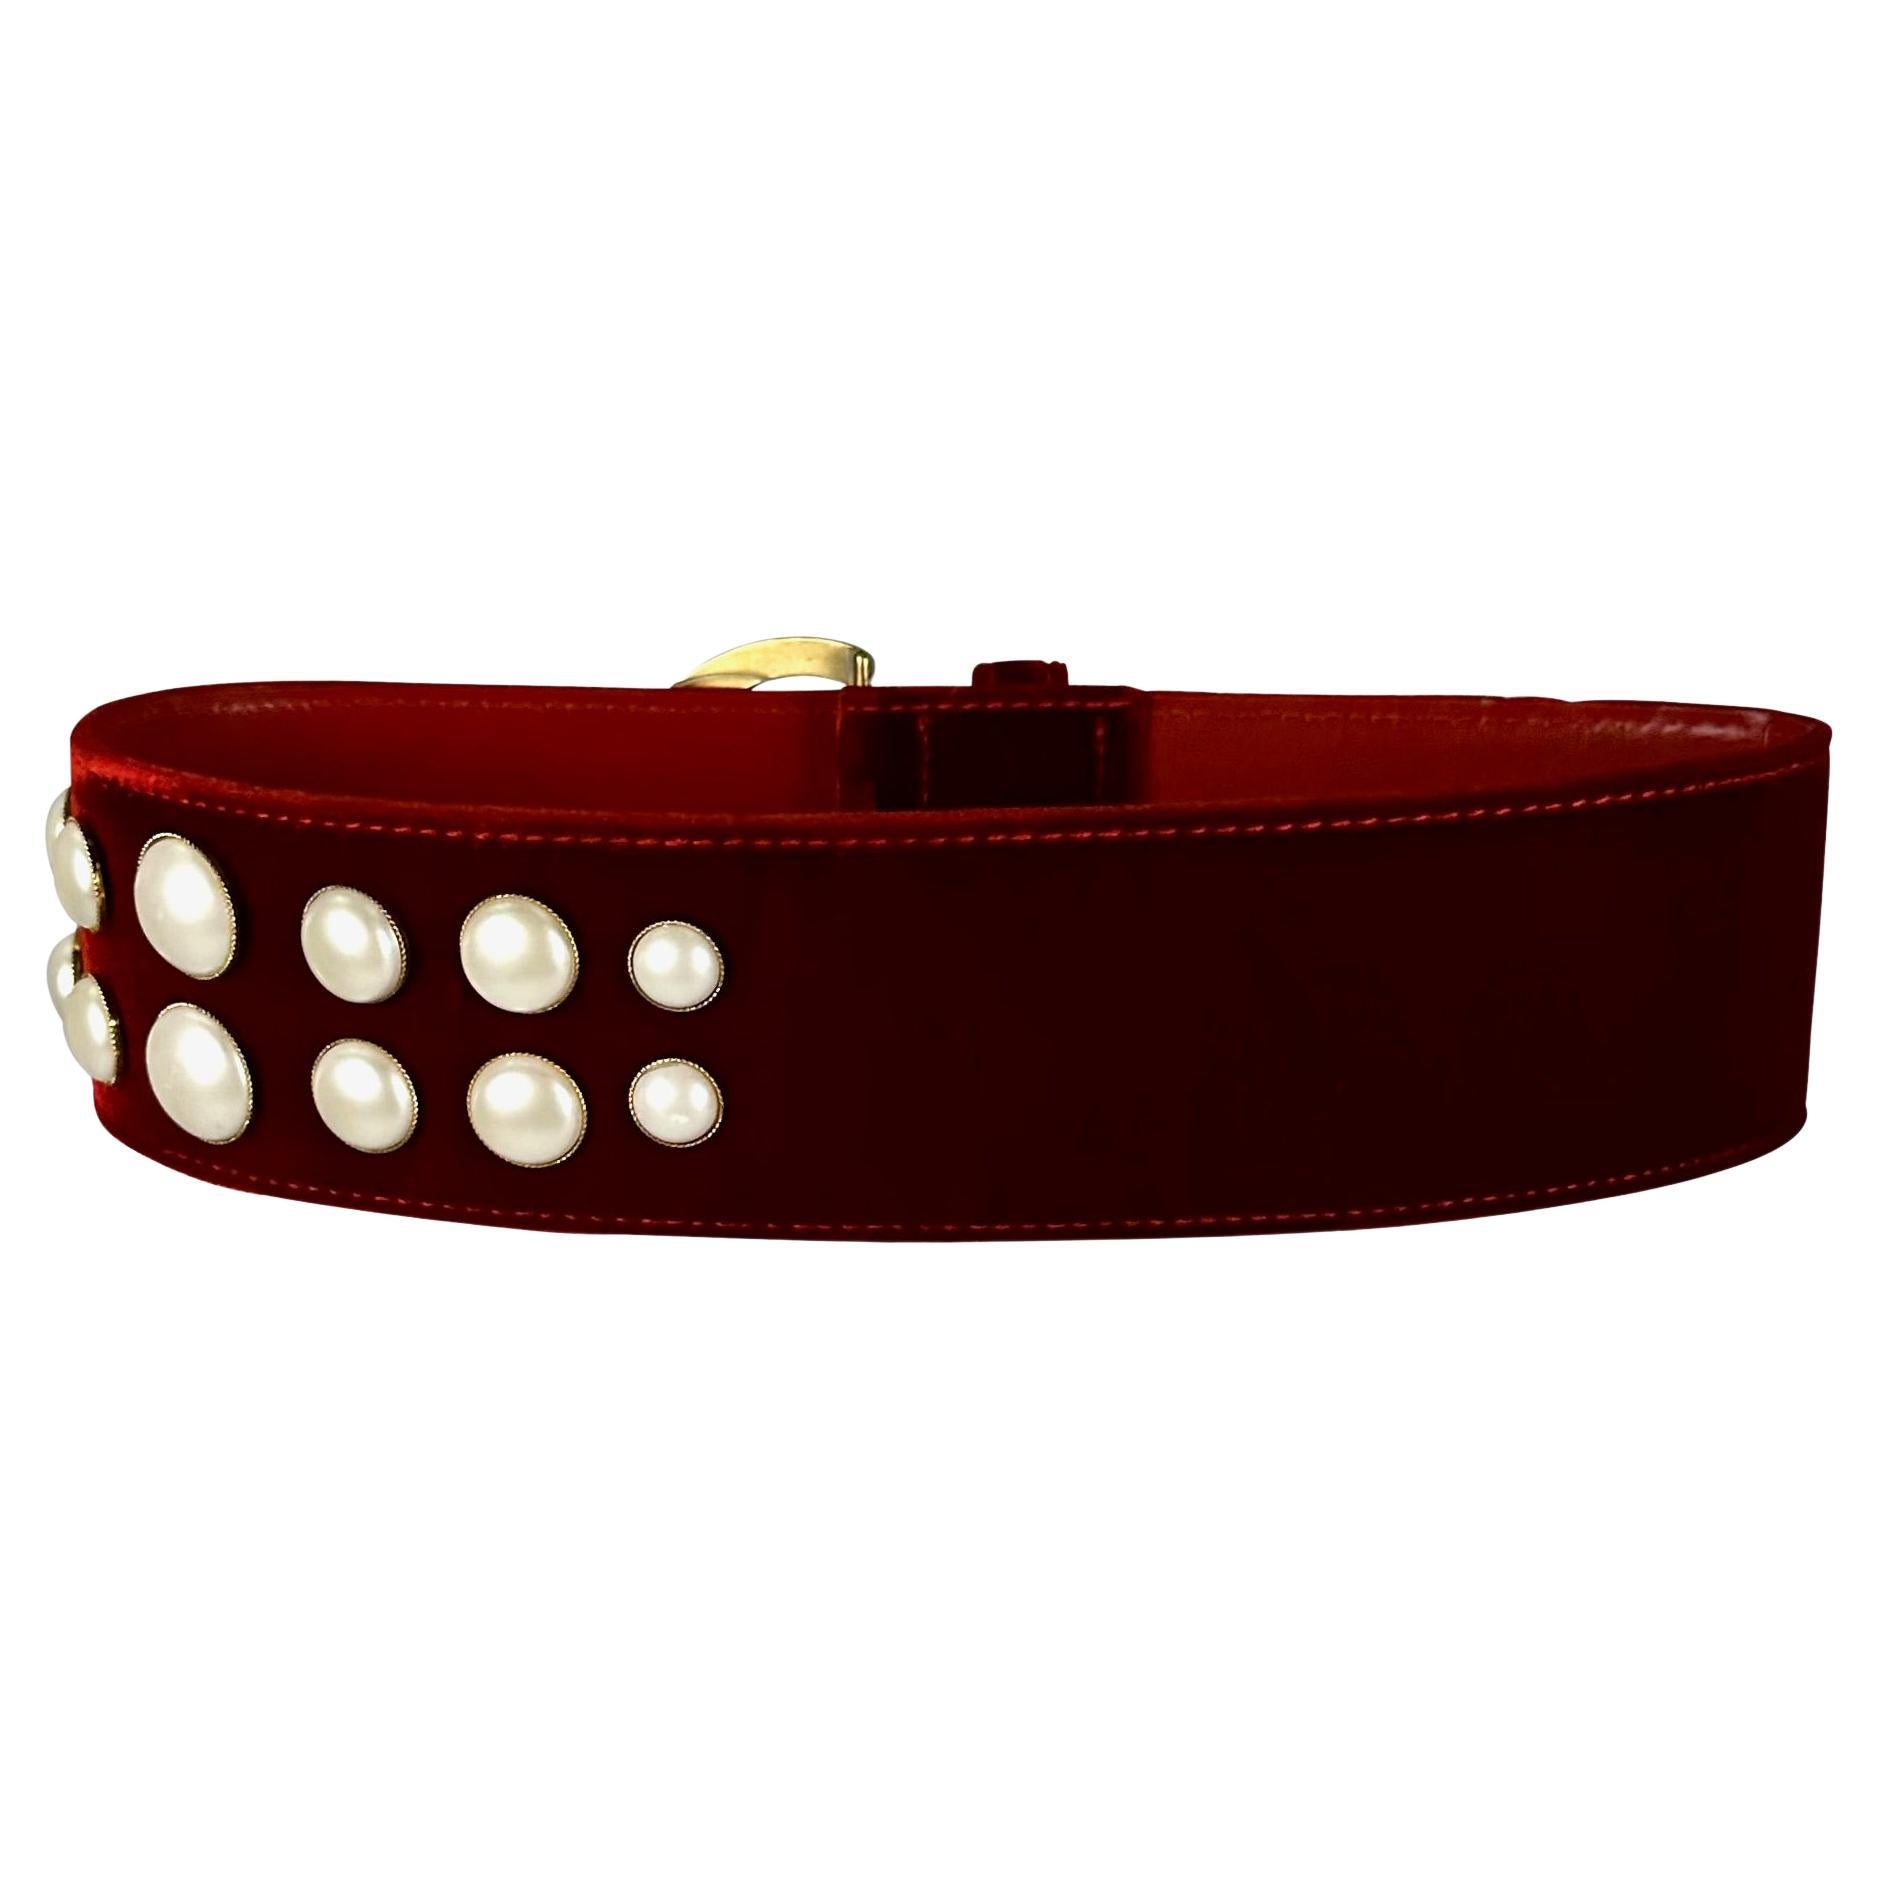 Presenting a fabulous red velvet Gianni Versace belt, designed by Gianni Versace. From the early 1990s, this incredible wide velvet belt features a gold-tone buckle and cluster of faux pearl accents. From over 30 years ago, this never worn belt is